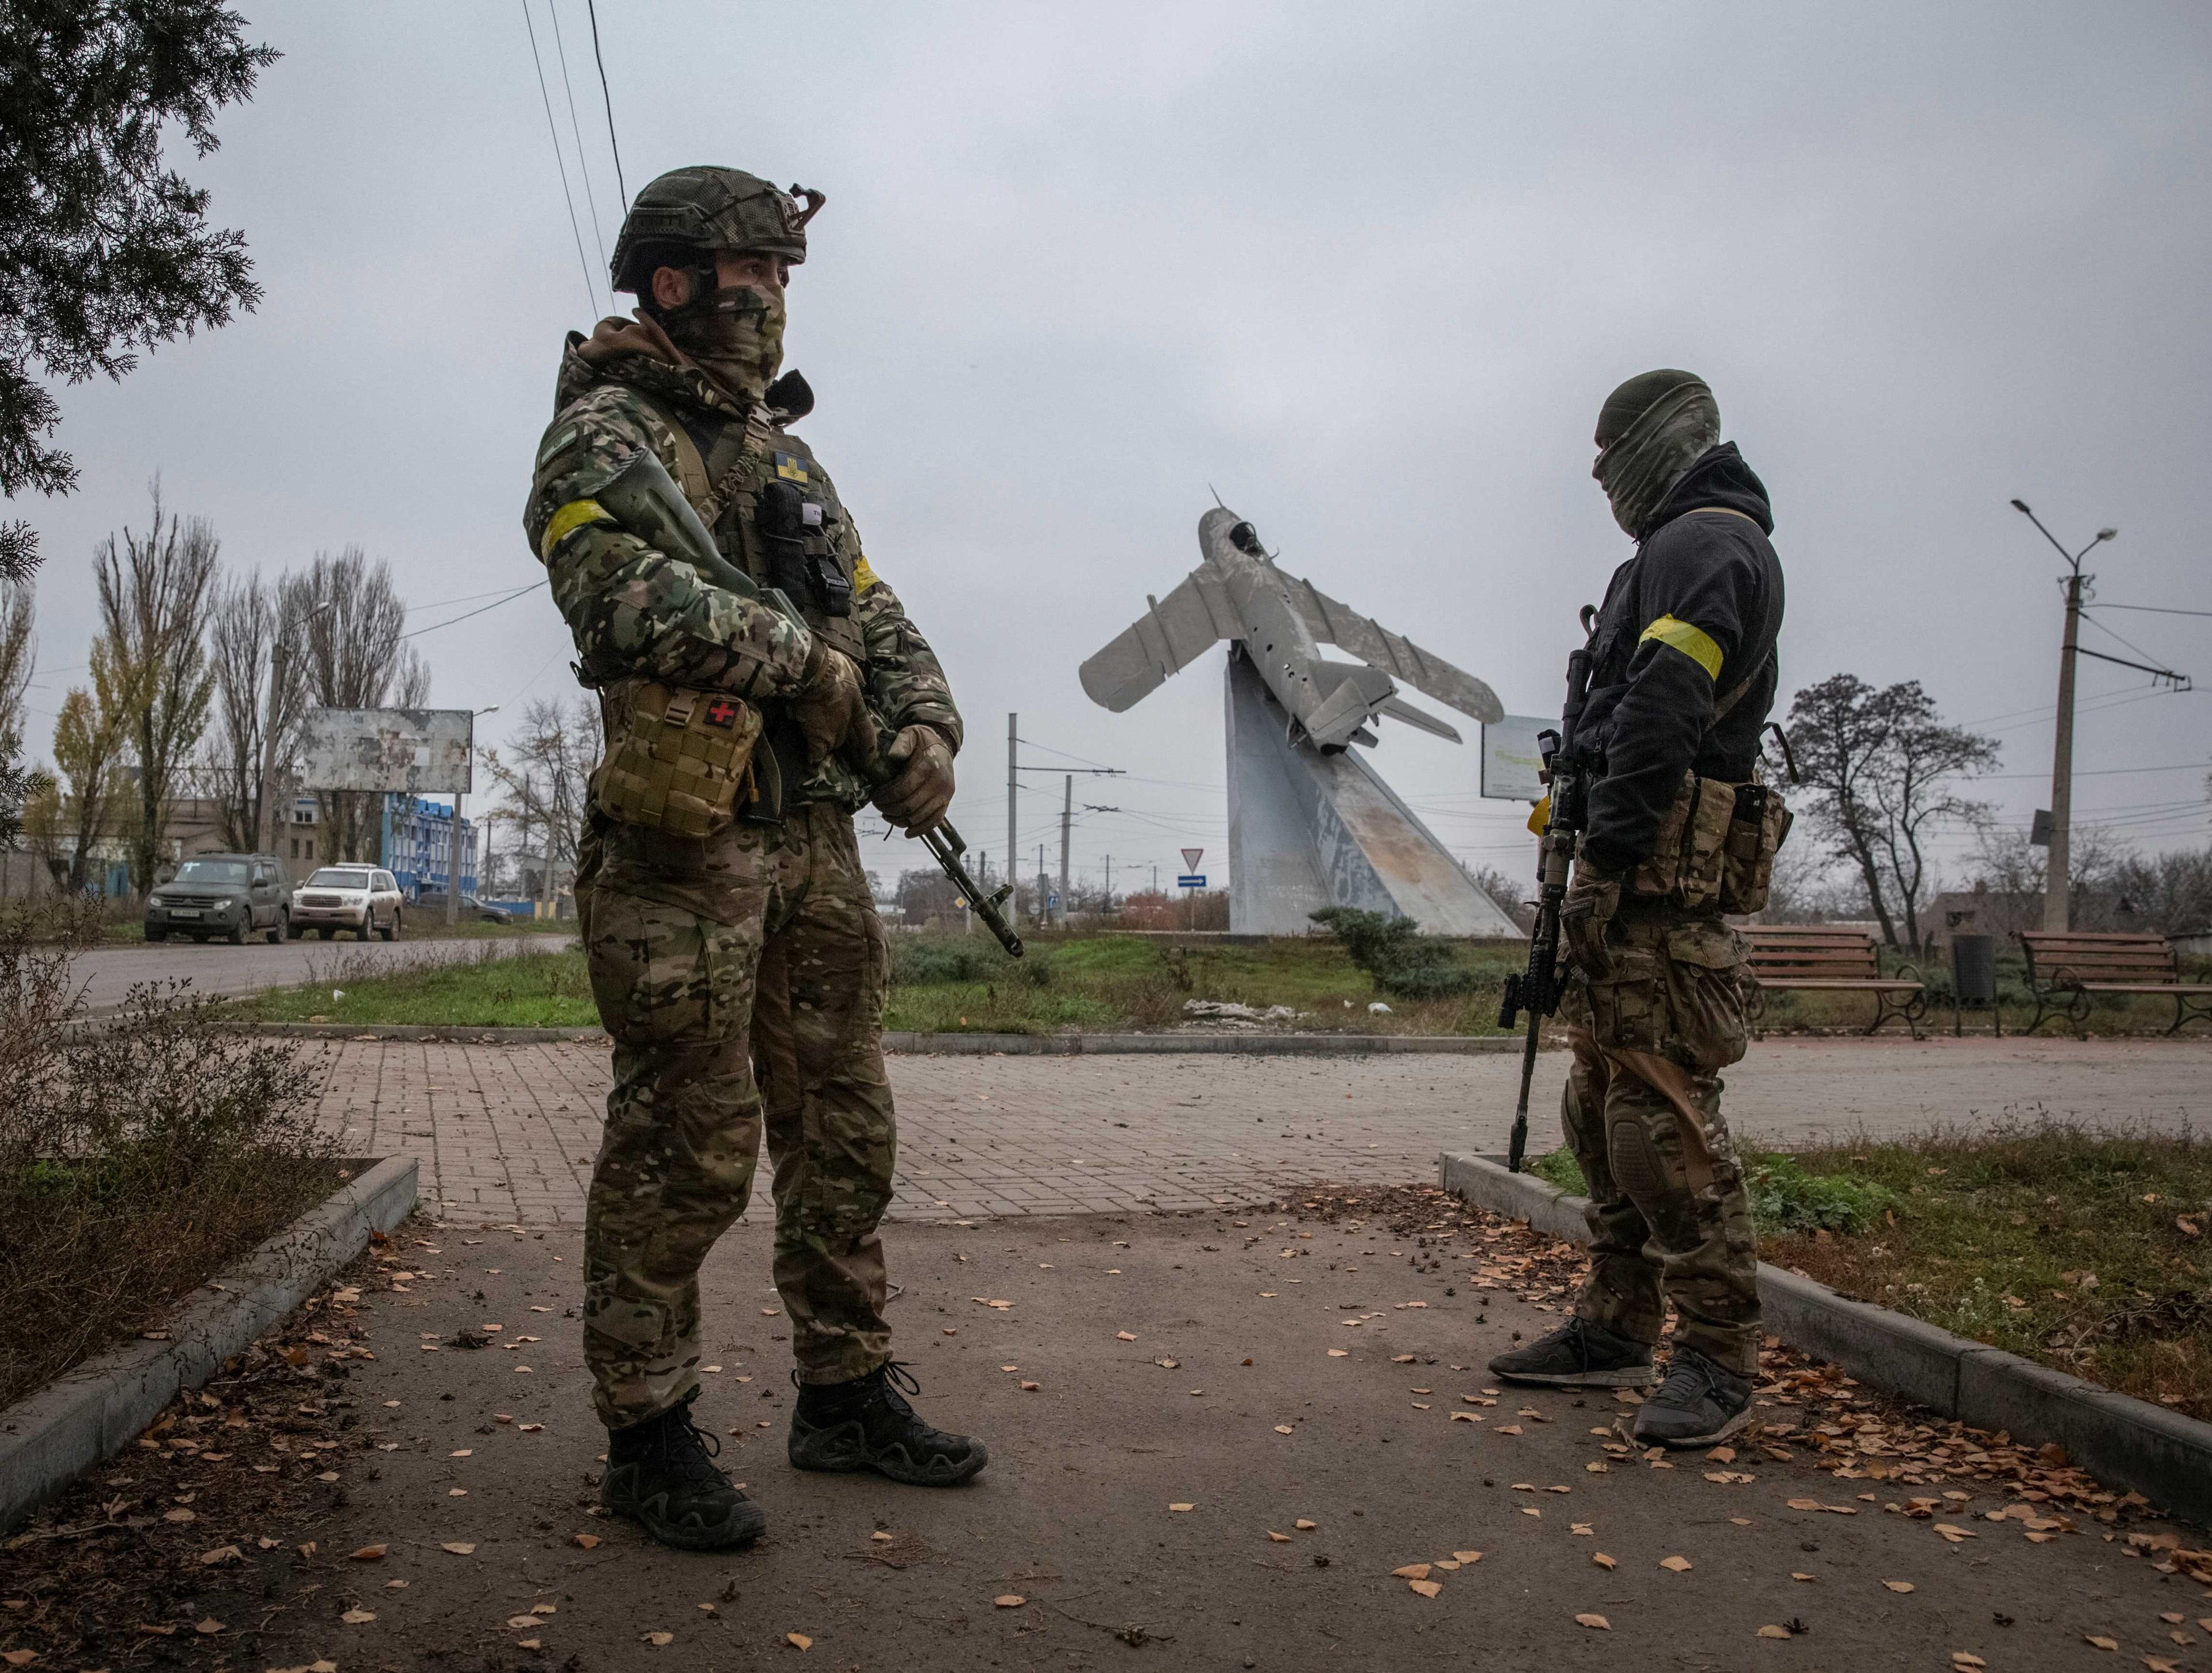 Members of the pro-Ukrainian Chechen battalion check an area, amid Russia's attack on Ukraine, in the town of Bakhmut, Ukraine, Nov 11. Photo: Reuters